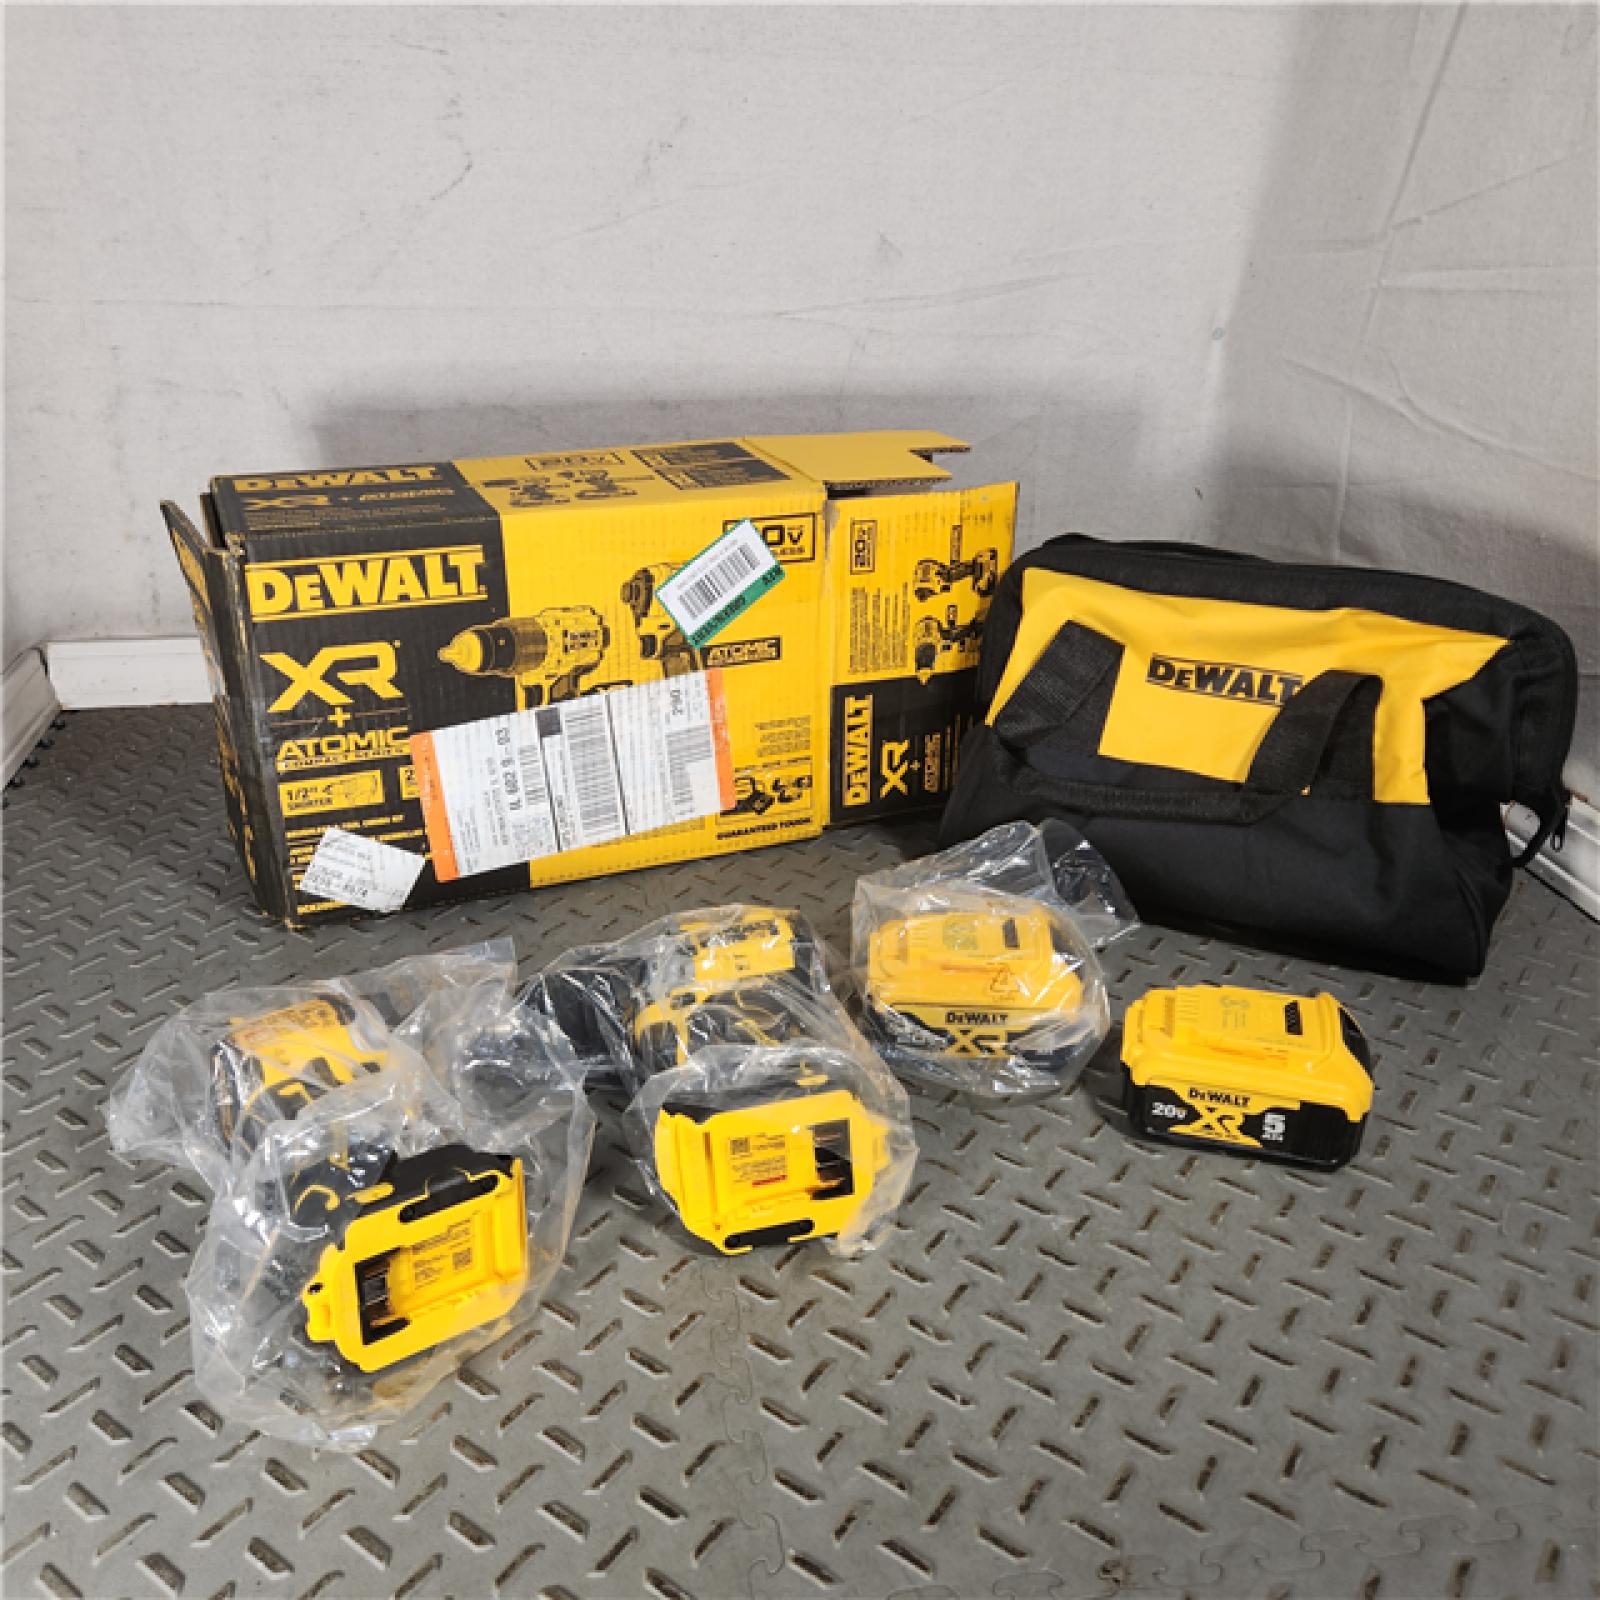 Houston Location - As-Is DeWalt DCK2050M2 20V Hammer Drill & Impact Driver Kit W/Batteries  Charger & Bag - Appears IN LIKE NEW Condition